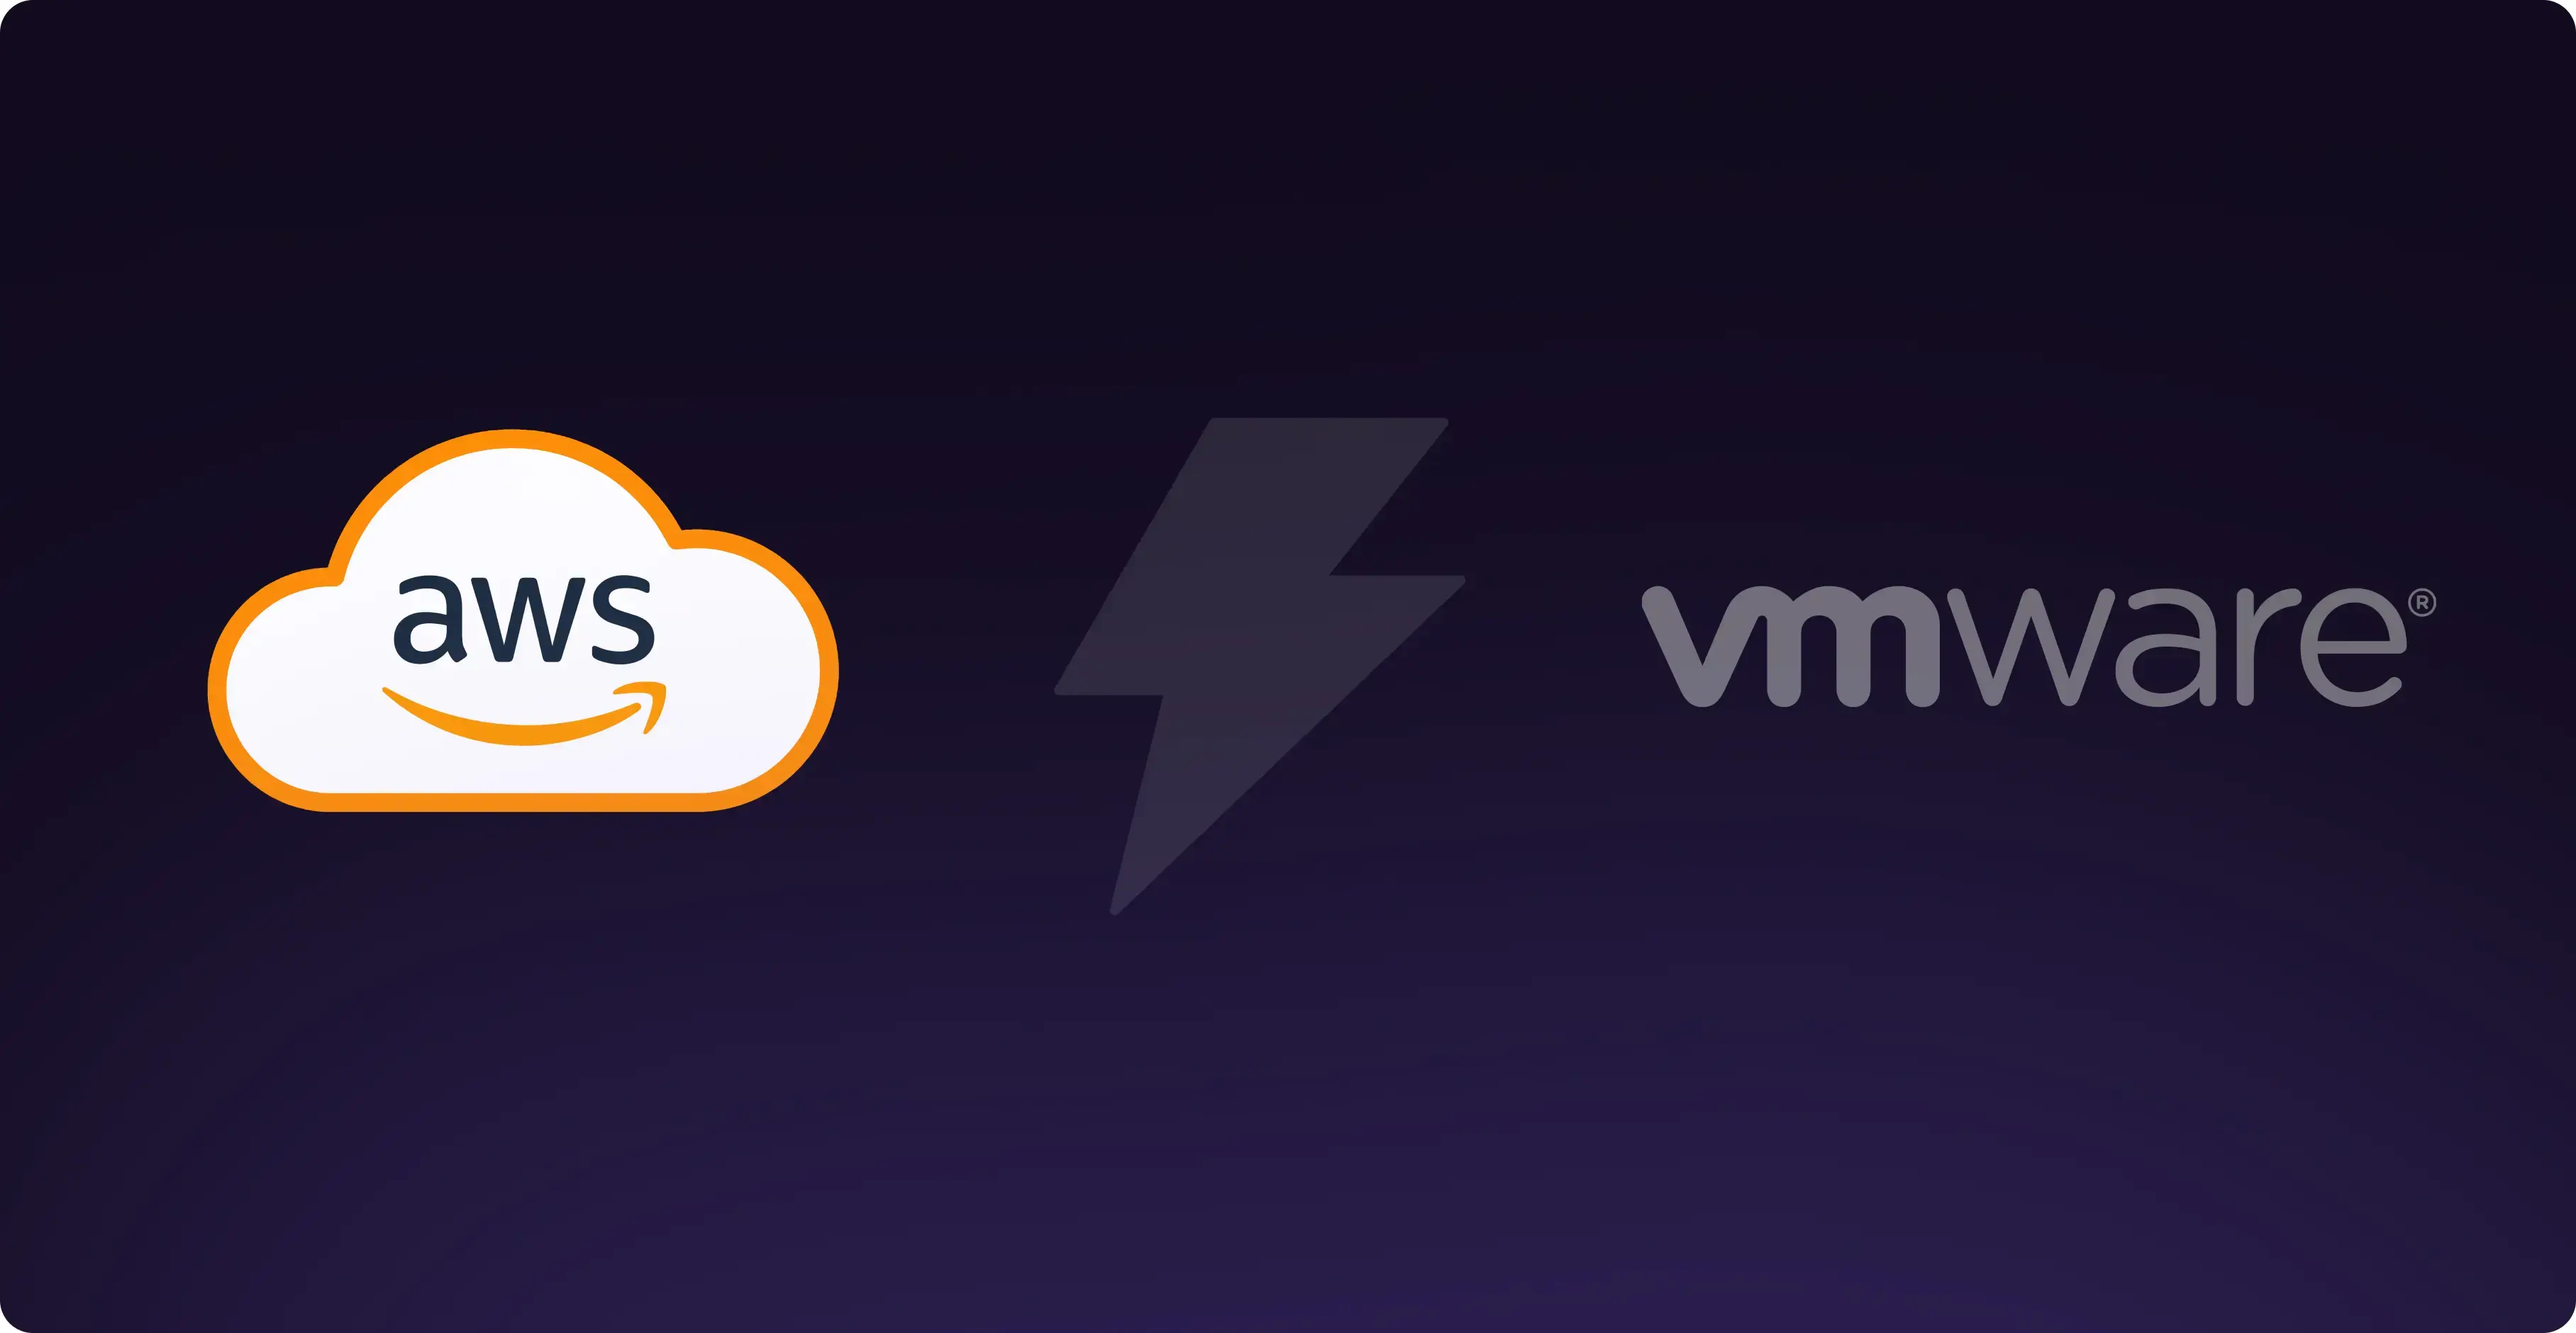 aws logo with a lightening blot and vmware logo on the other side on a dark purple background